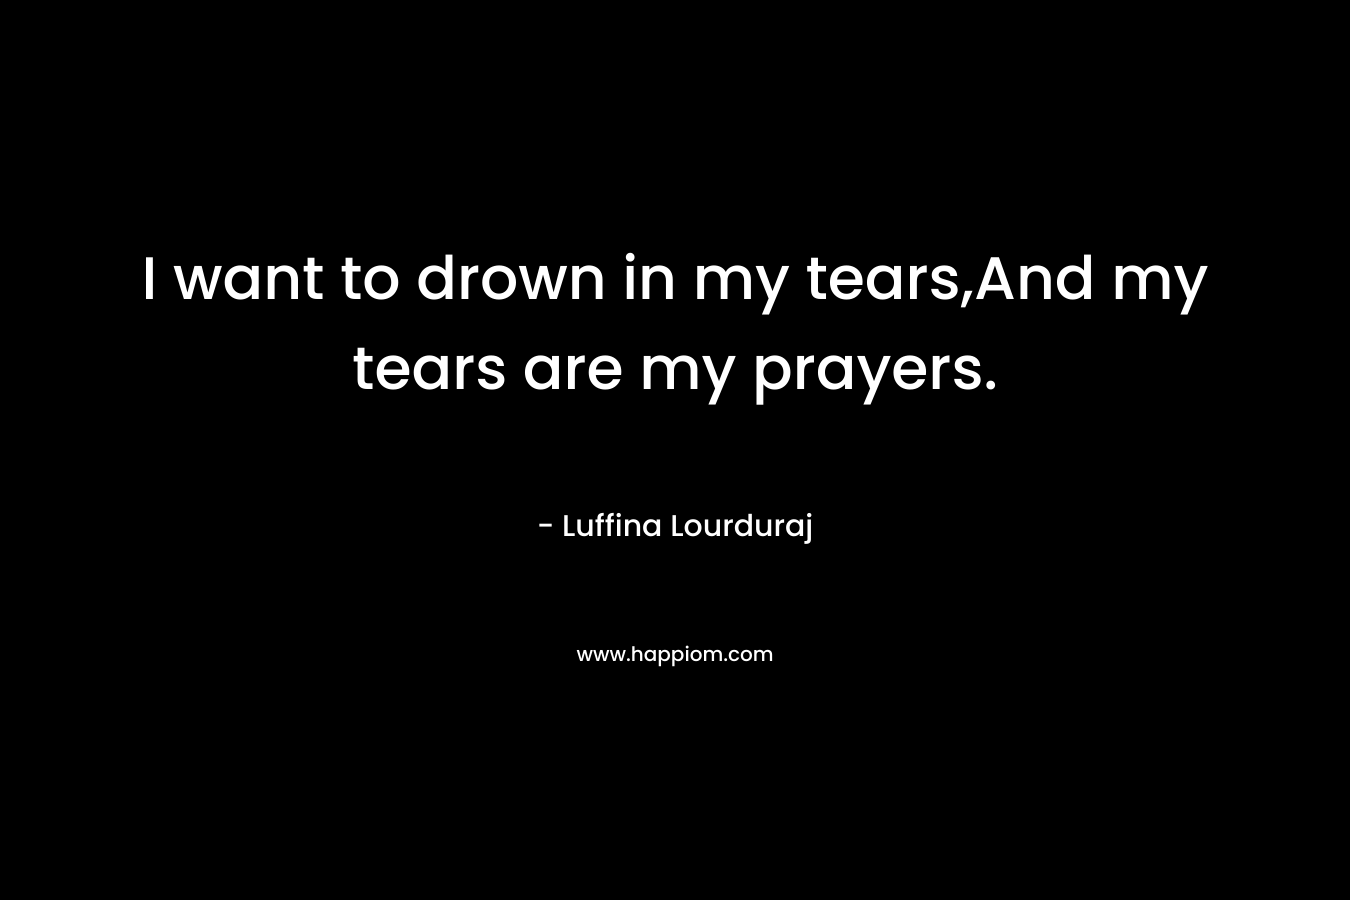 I want to drown in my tears,And my tears are my prayers.